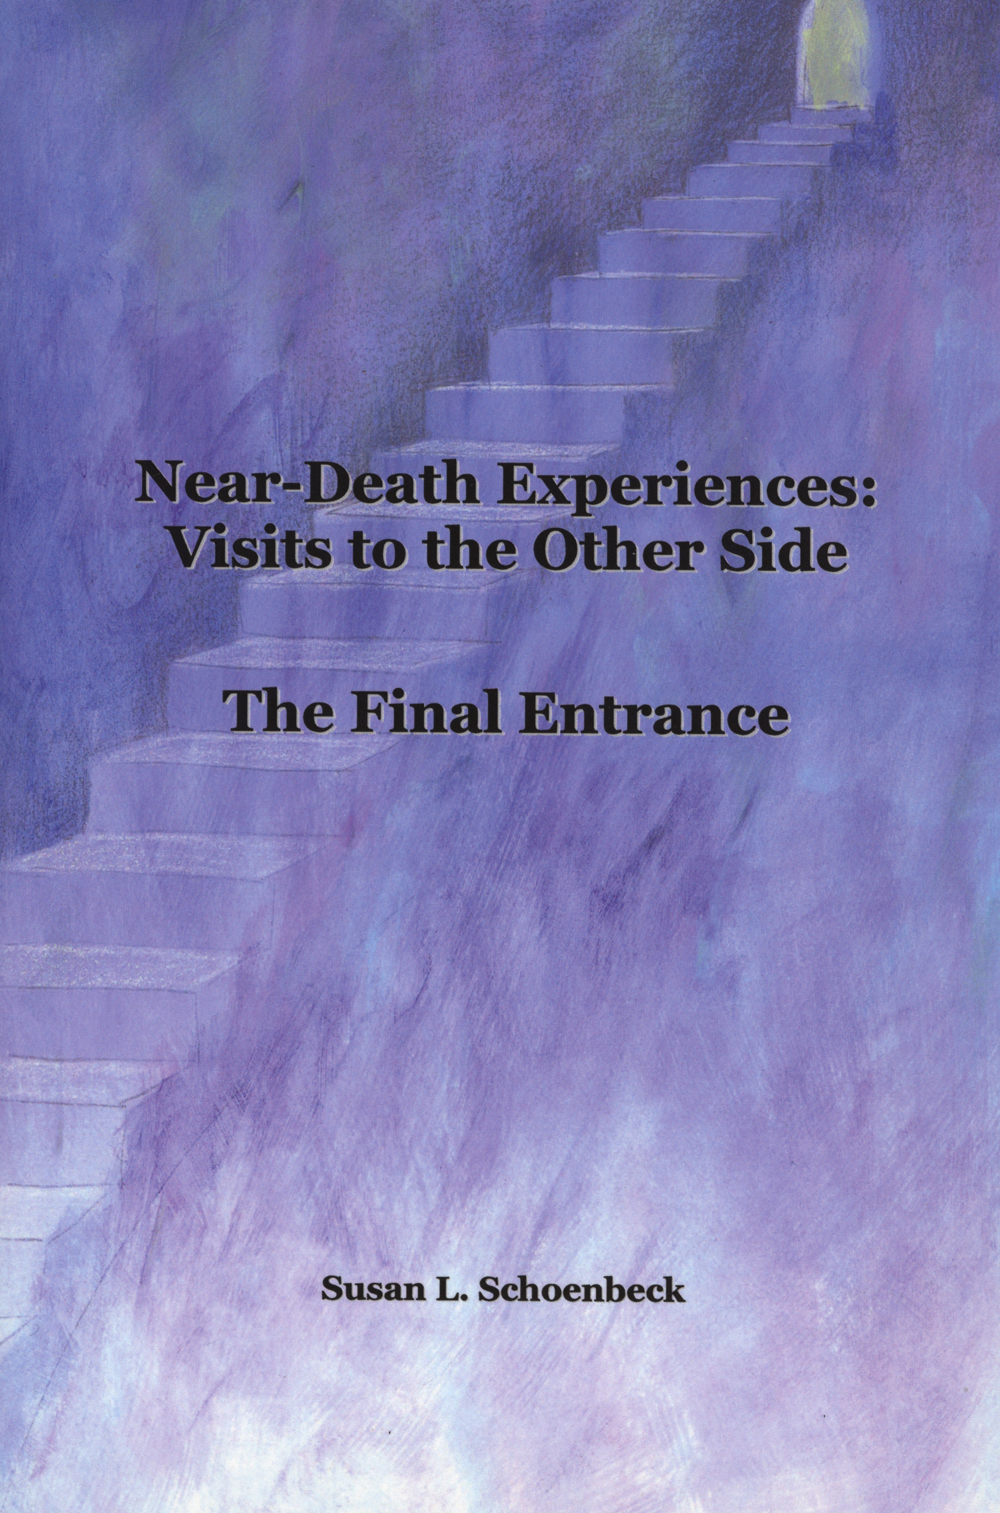 Near-Death Experiences: Visits to the Other Size